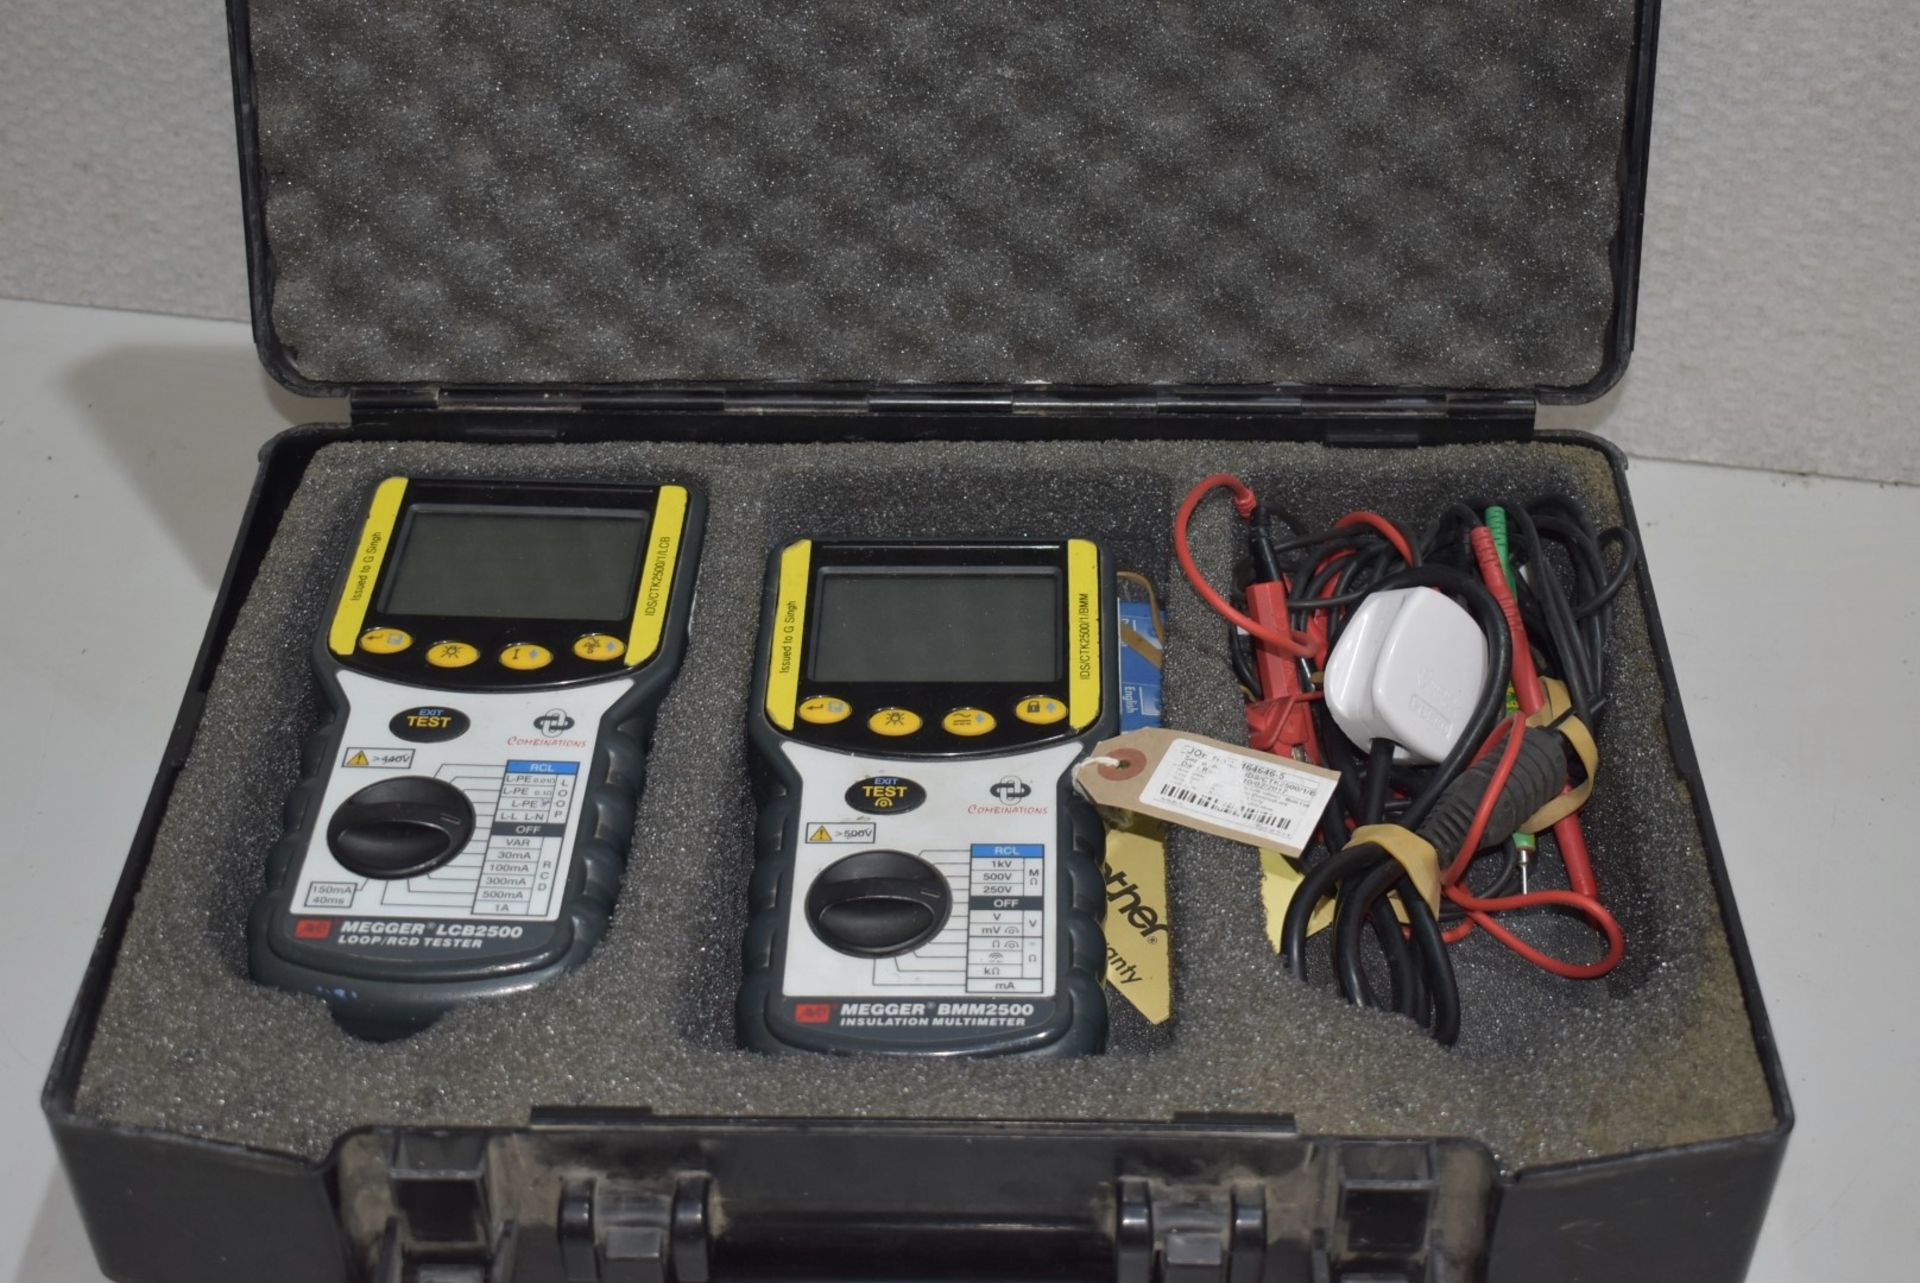 1 x MEGGER CTK 2500 Test Kit - Includes 1 x BMM 2500 insulation multimeter, and 1 x LCB2500 2 loop/ - Image 11 of 11